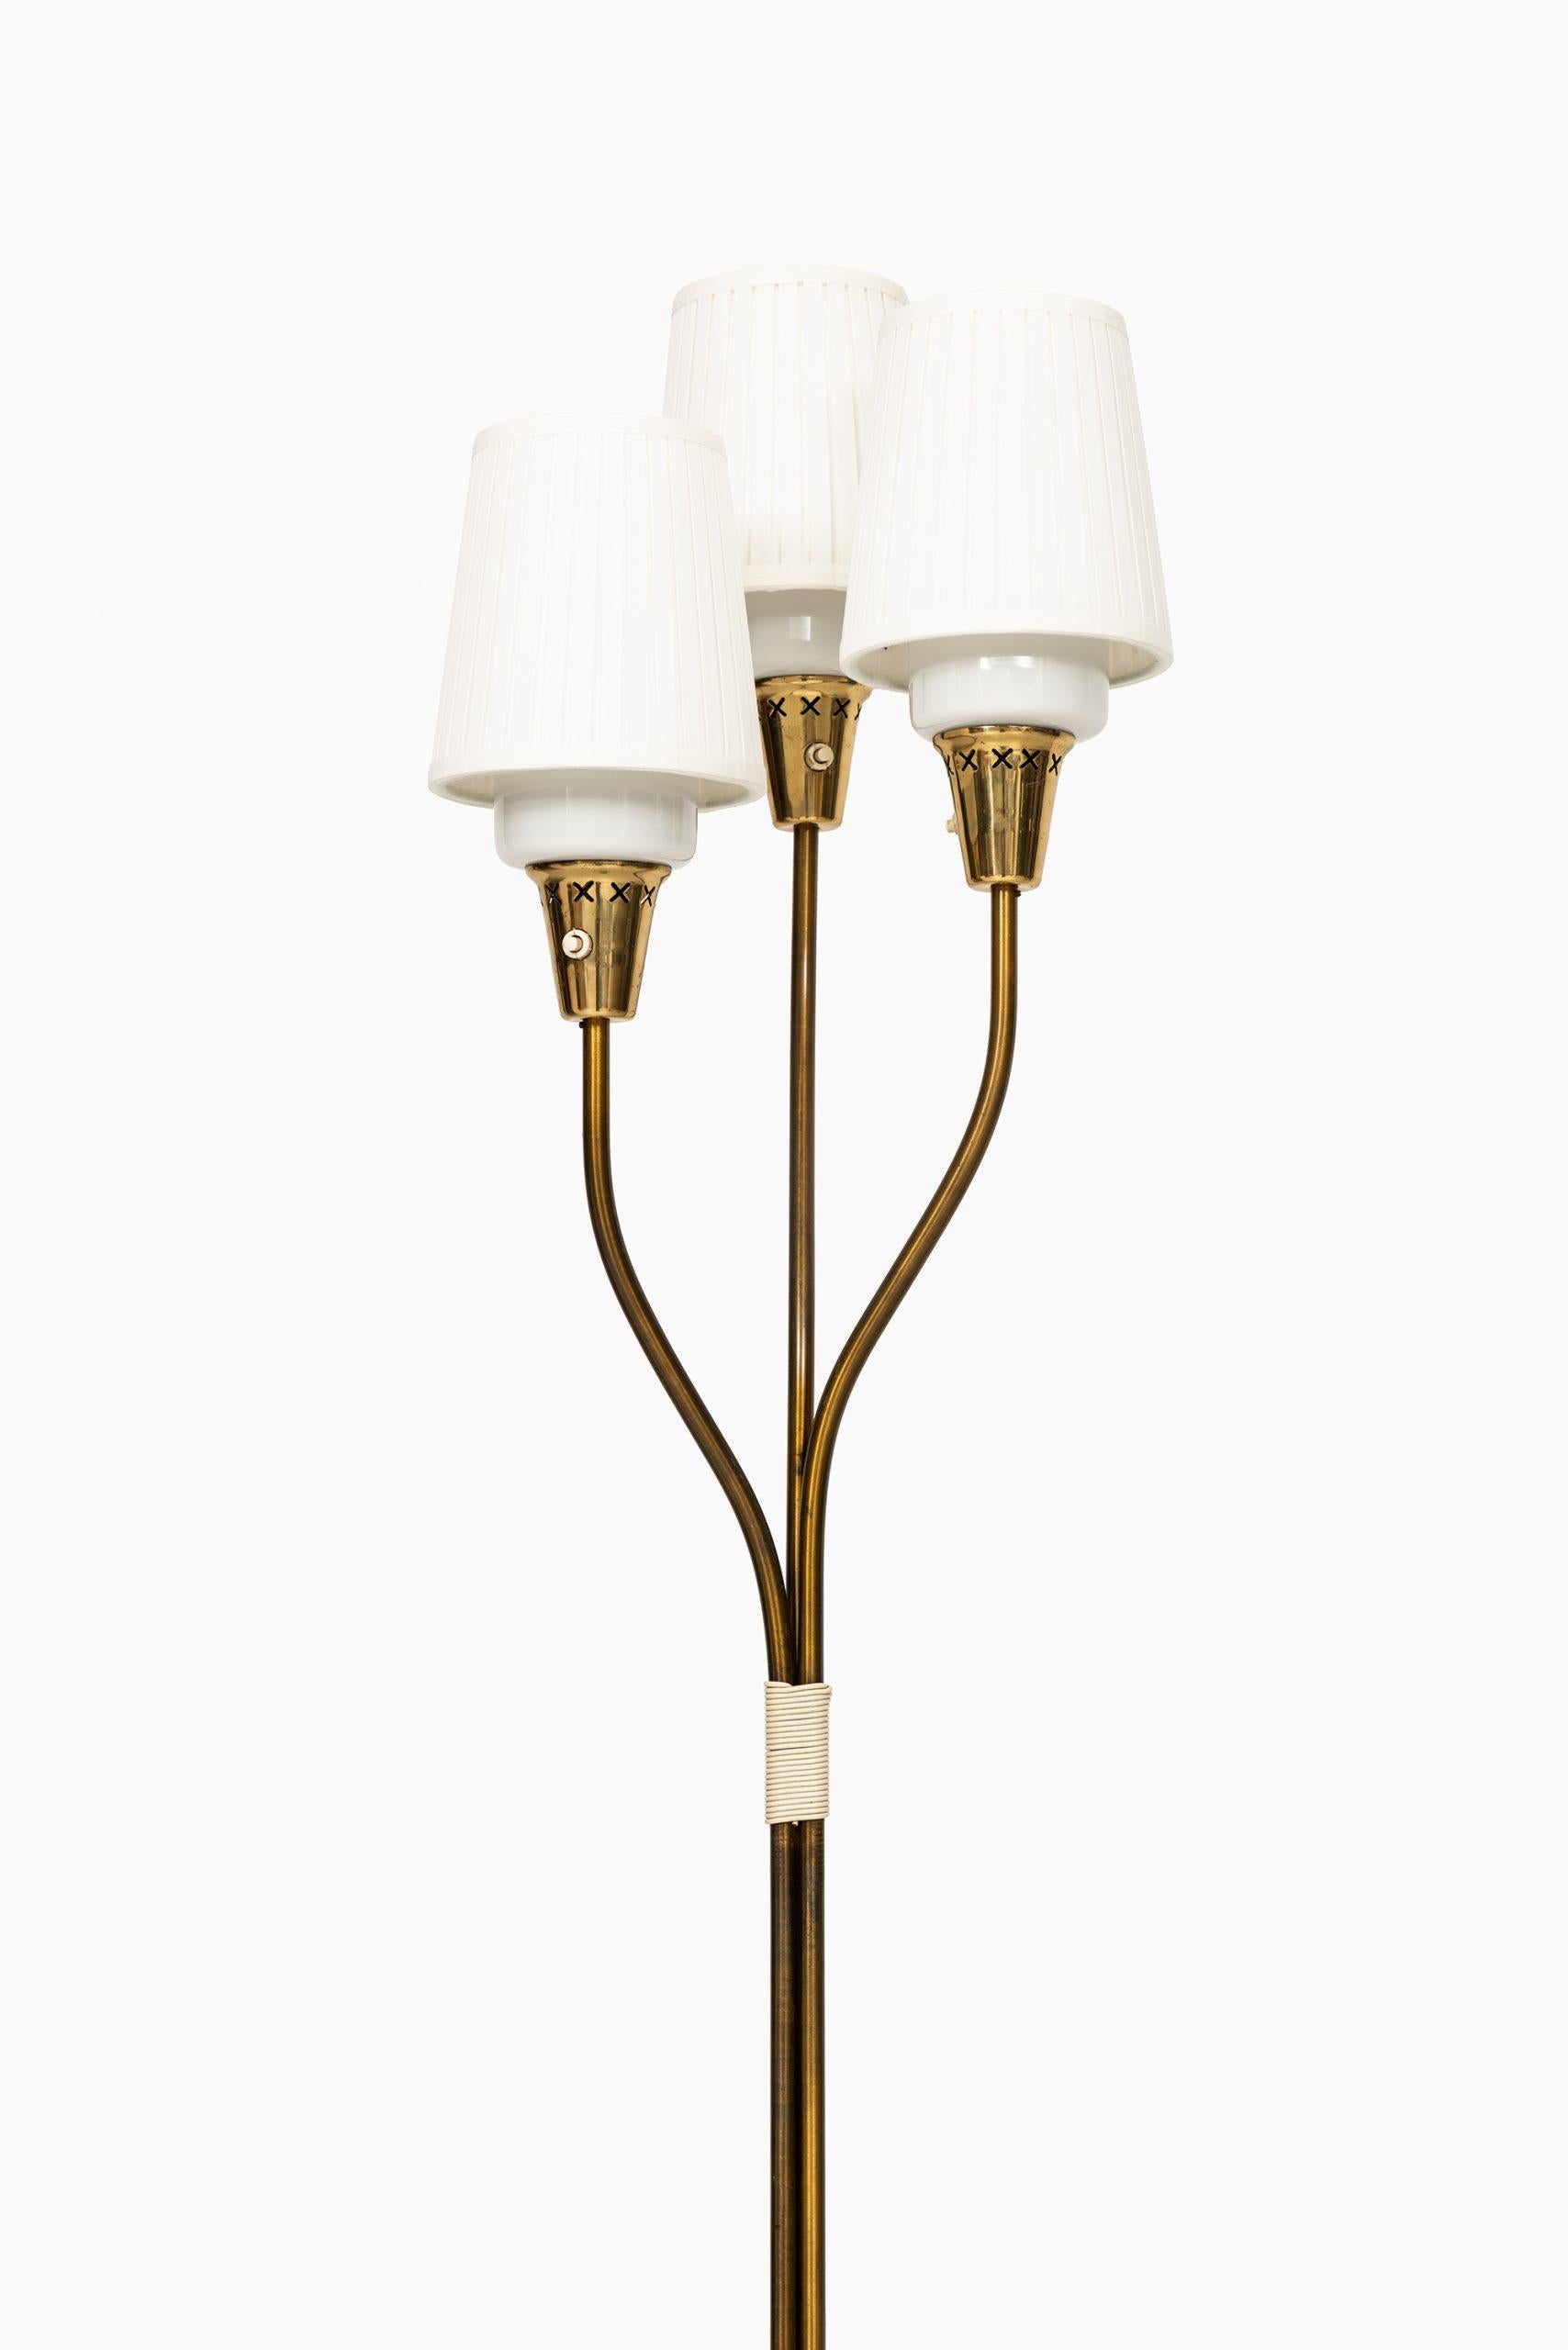 Rare floor lamp attributed to Hans Bergström. Produced in Sweden.